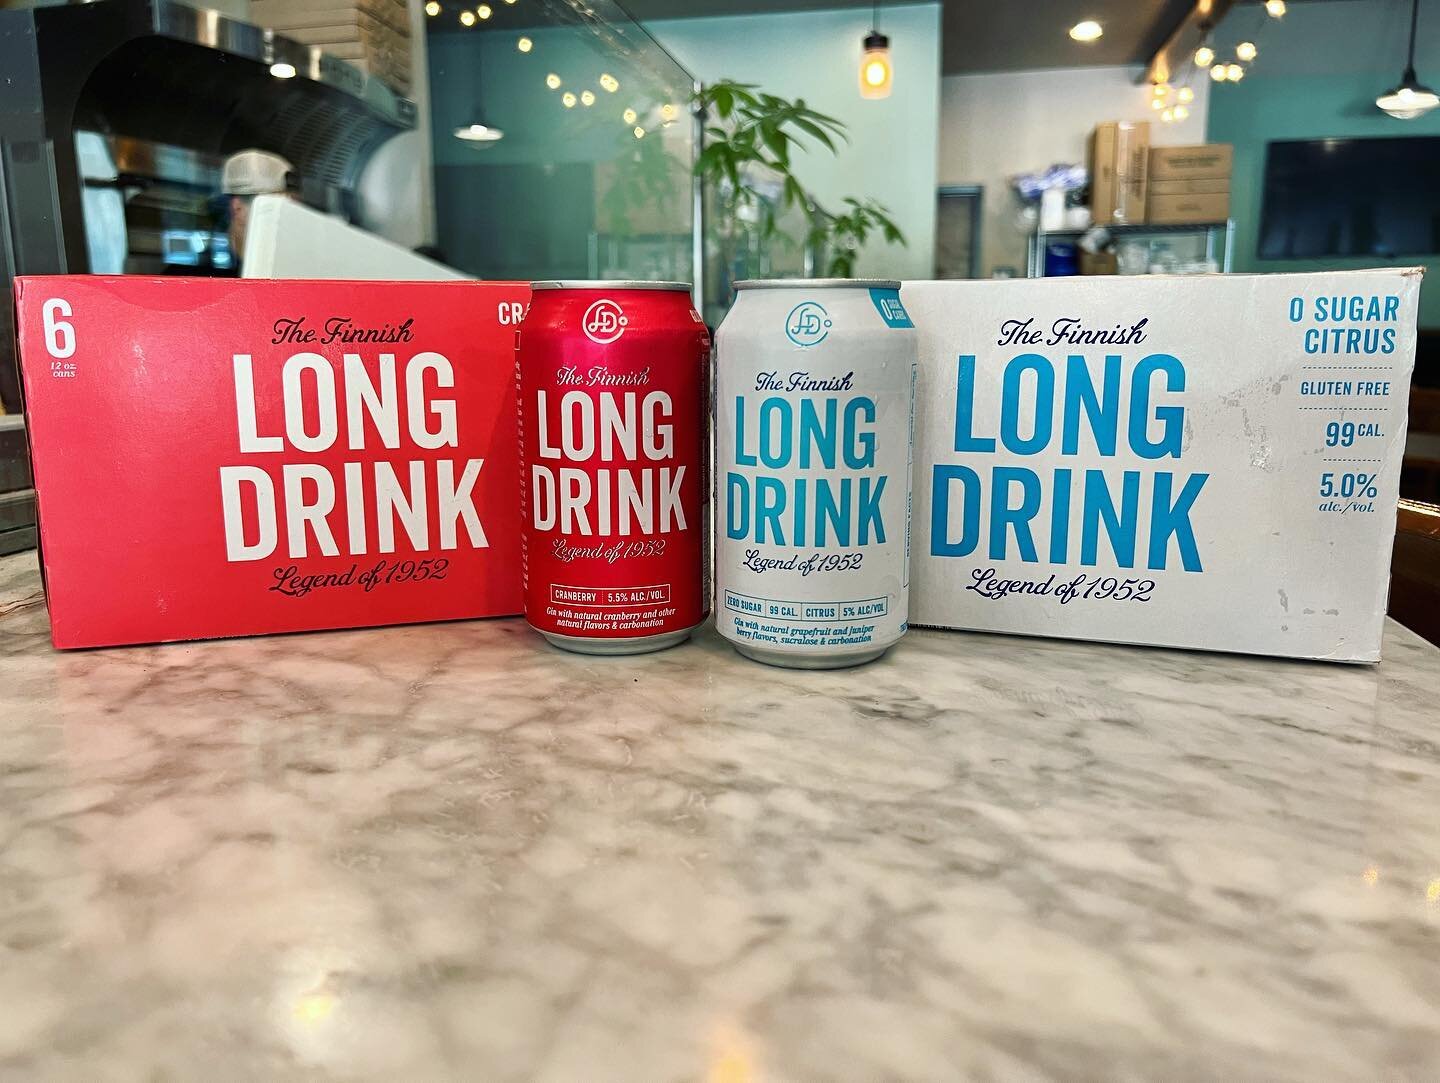 Into Seltzers?
We&rsquo;ve added High Noon and The Finnish Long Drink.

Long Drink is a refreshing gin seltzer that originated in 1952 when Finland was looking for an innovative way to serve drinks quickly during the 1952 Olympic Summer Games and it 